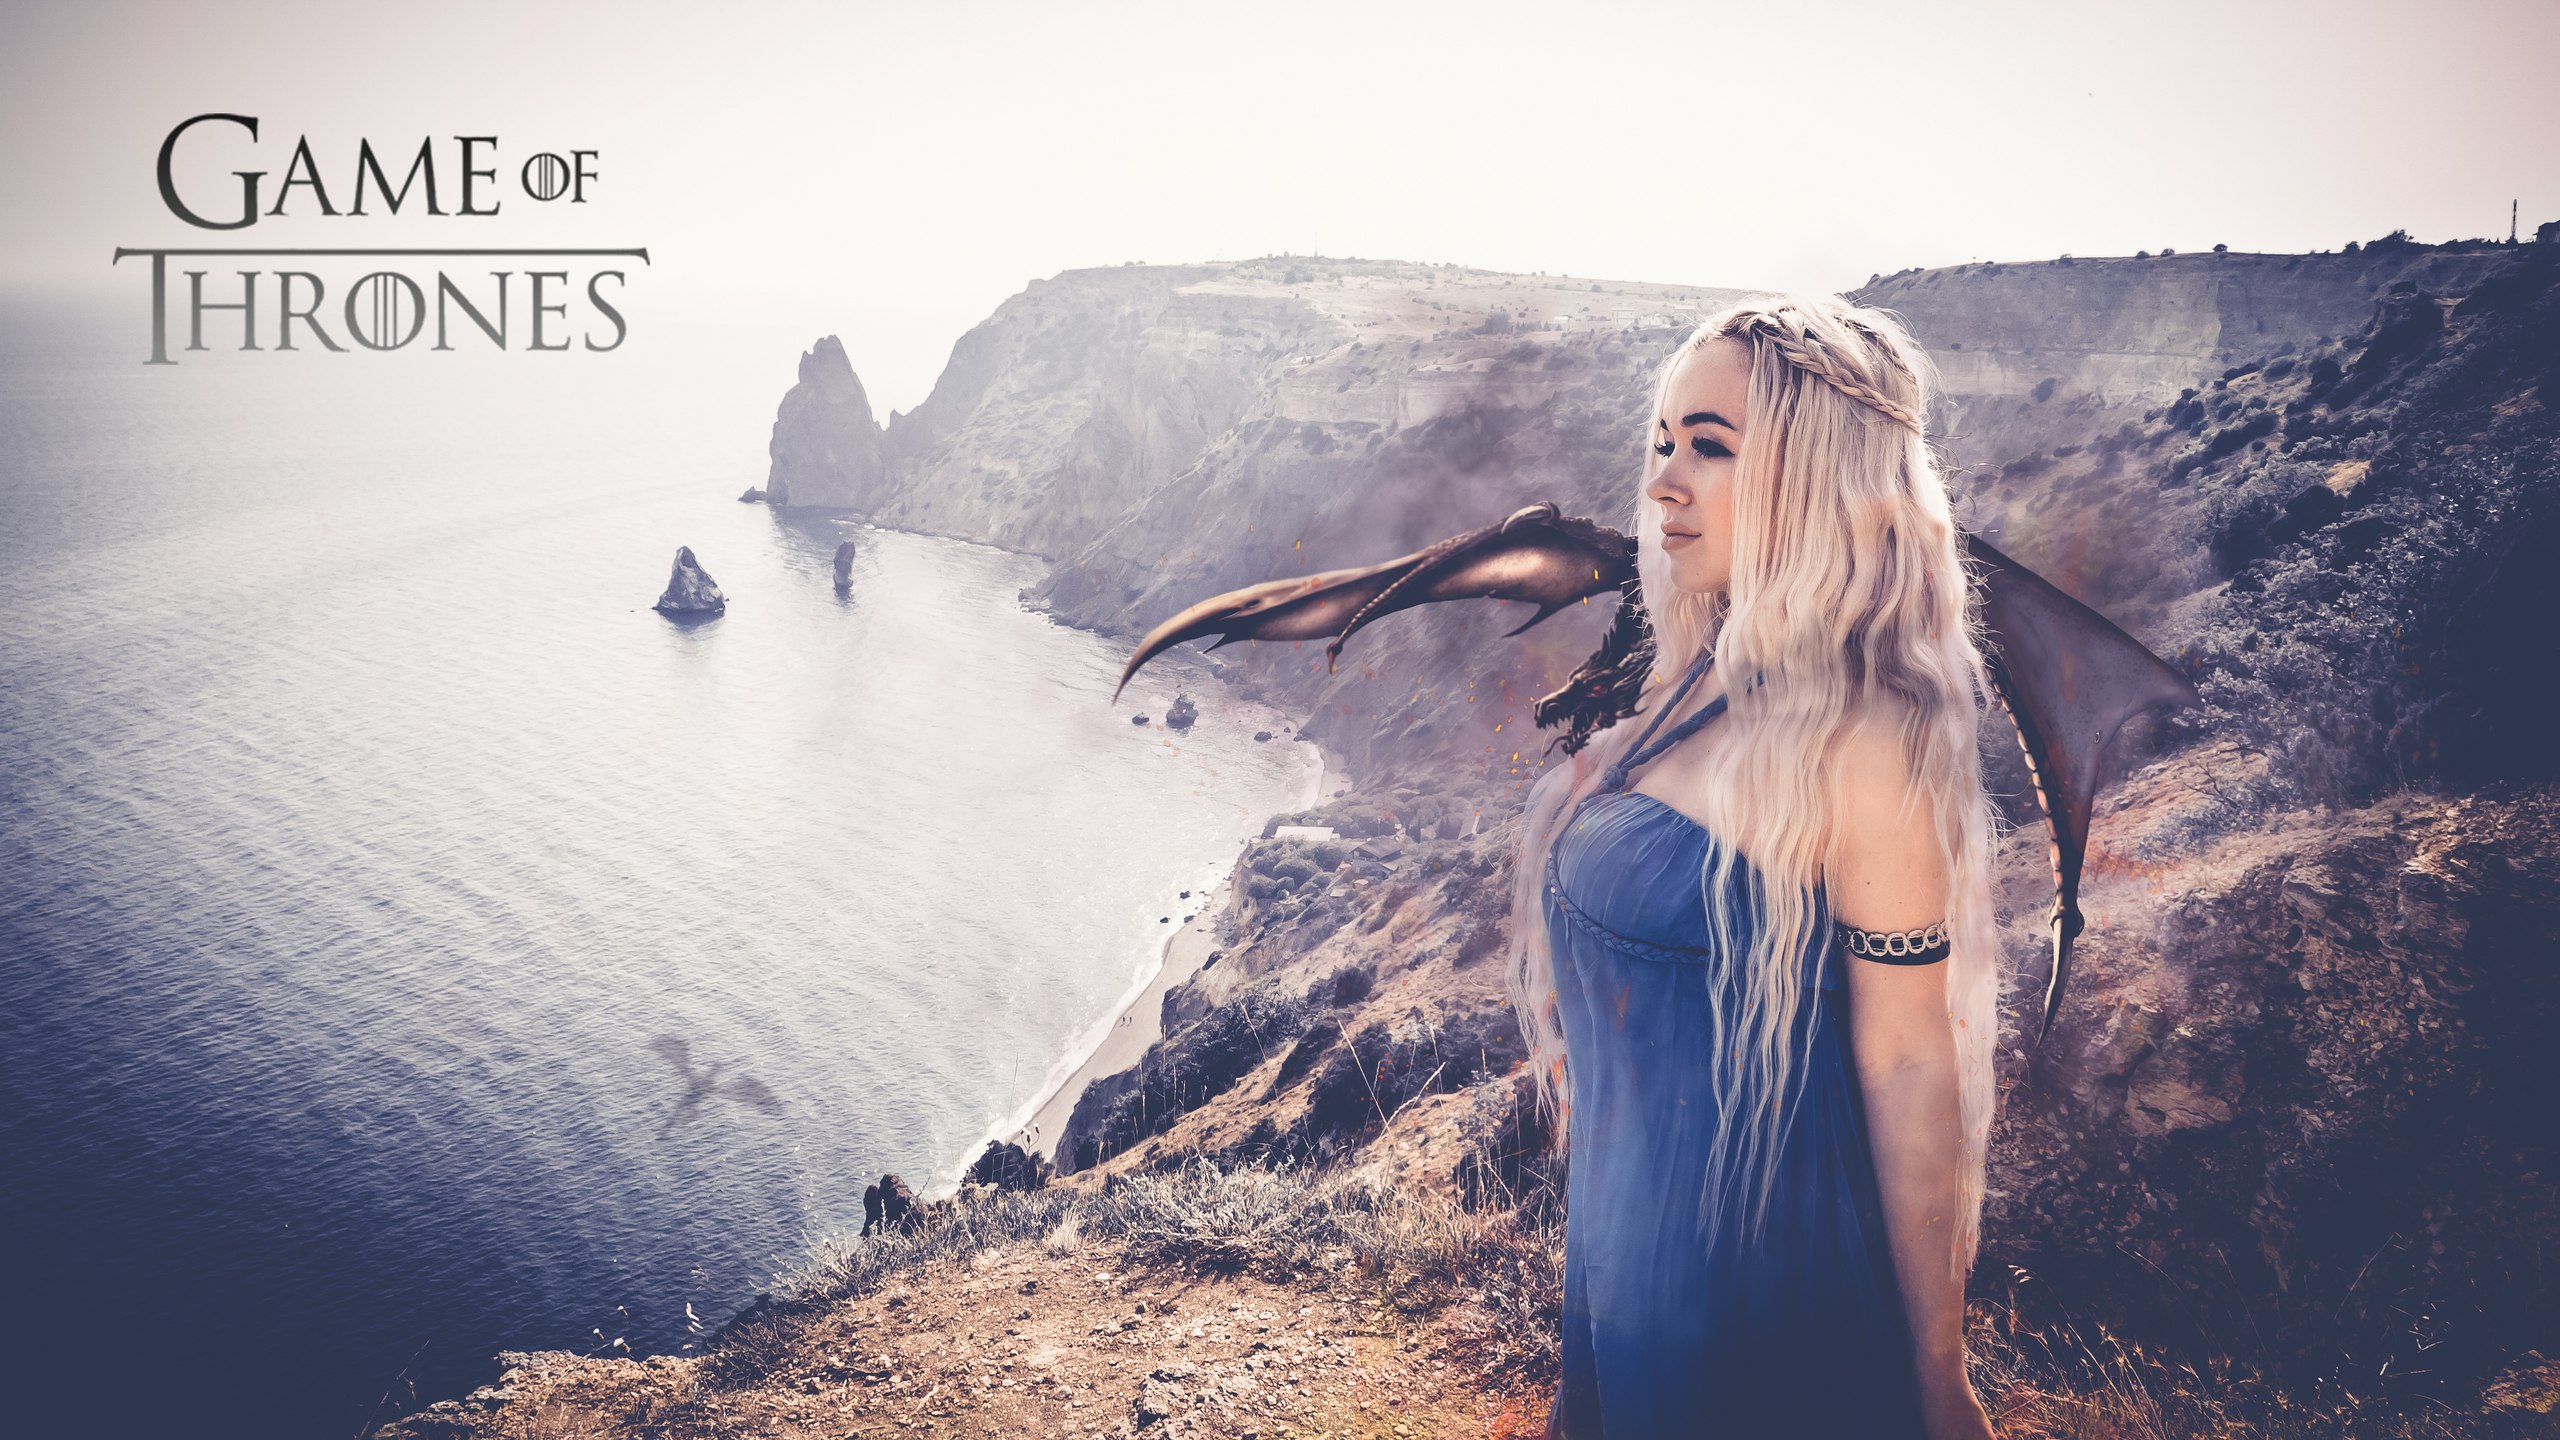 Khaleesi With Dragon Cosplay, HD Tv Shows, 4k Wallpapers ...